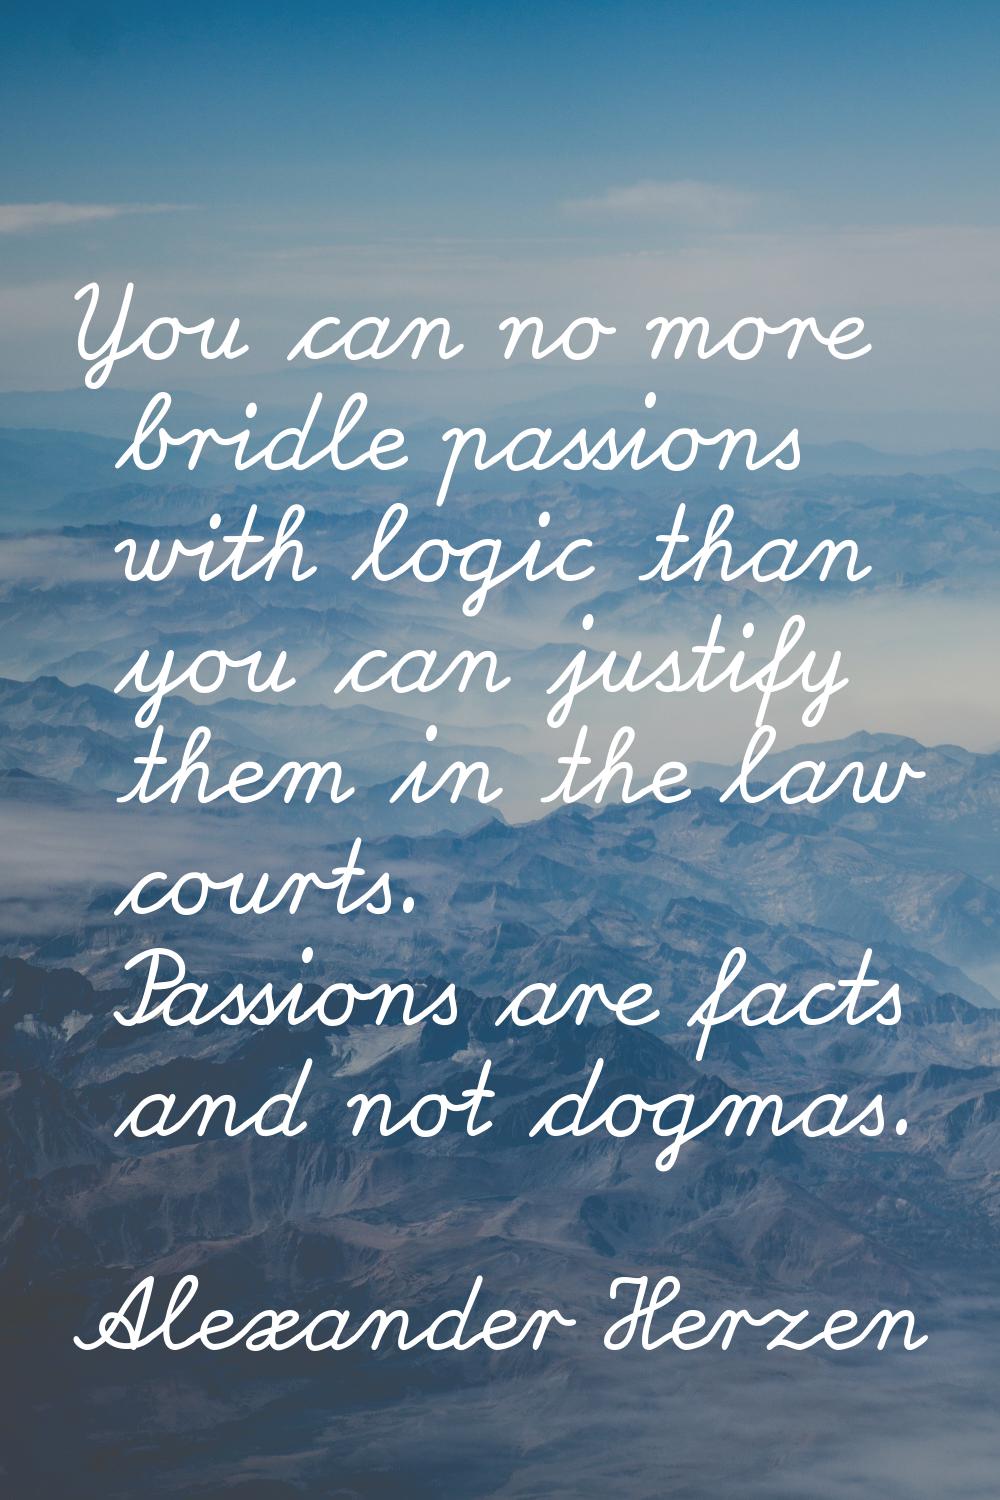 You can no more bridle passions with logic than you can justify them in the law courts. Passions ar